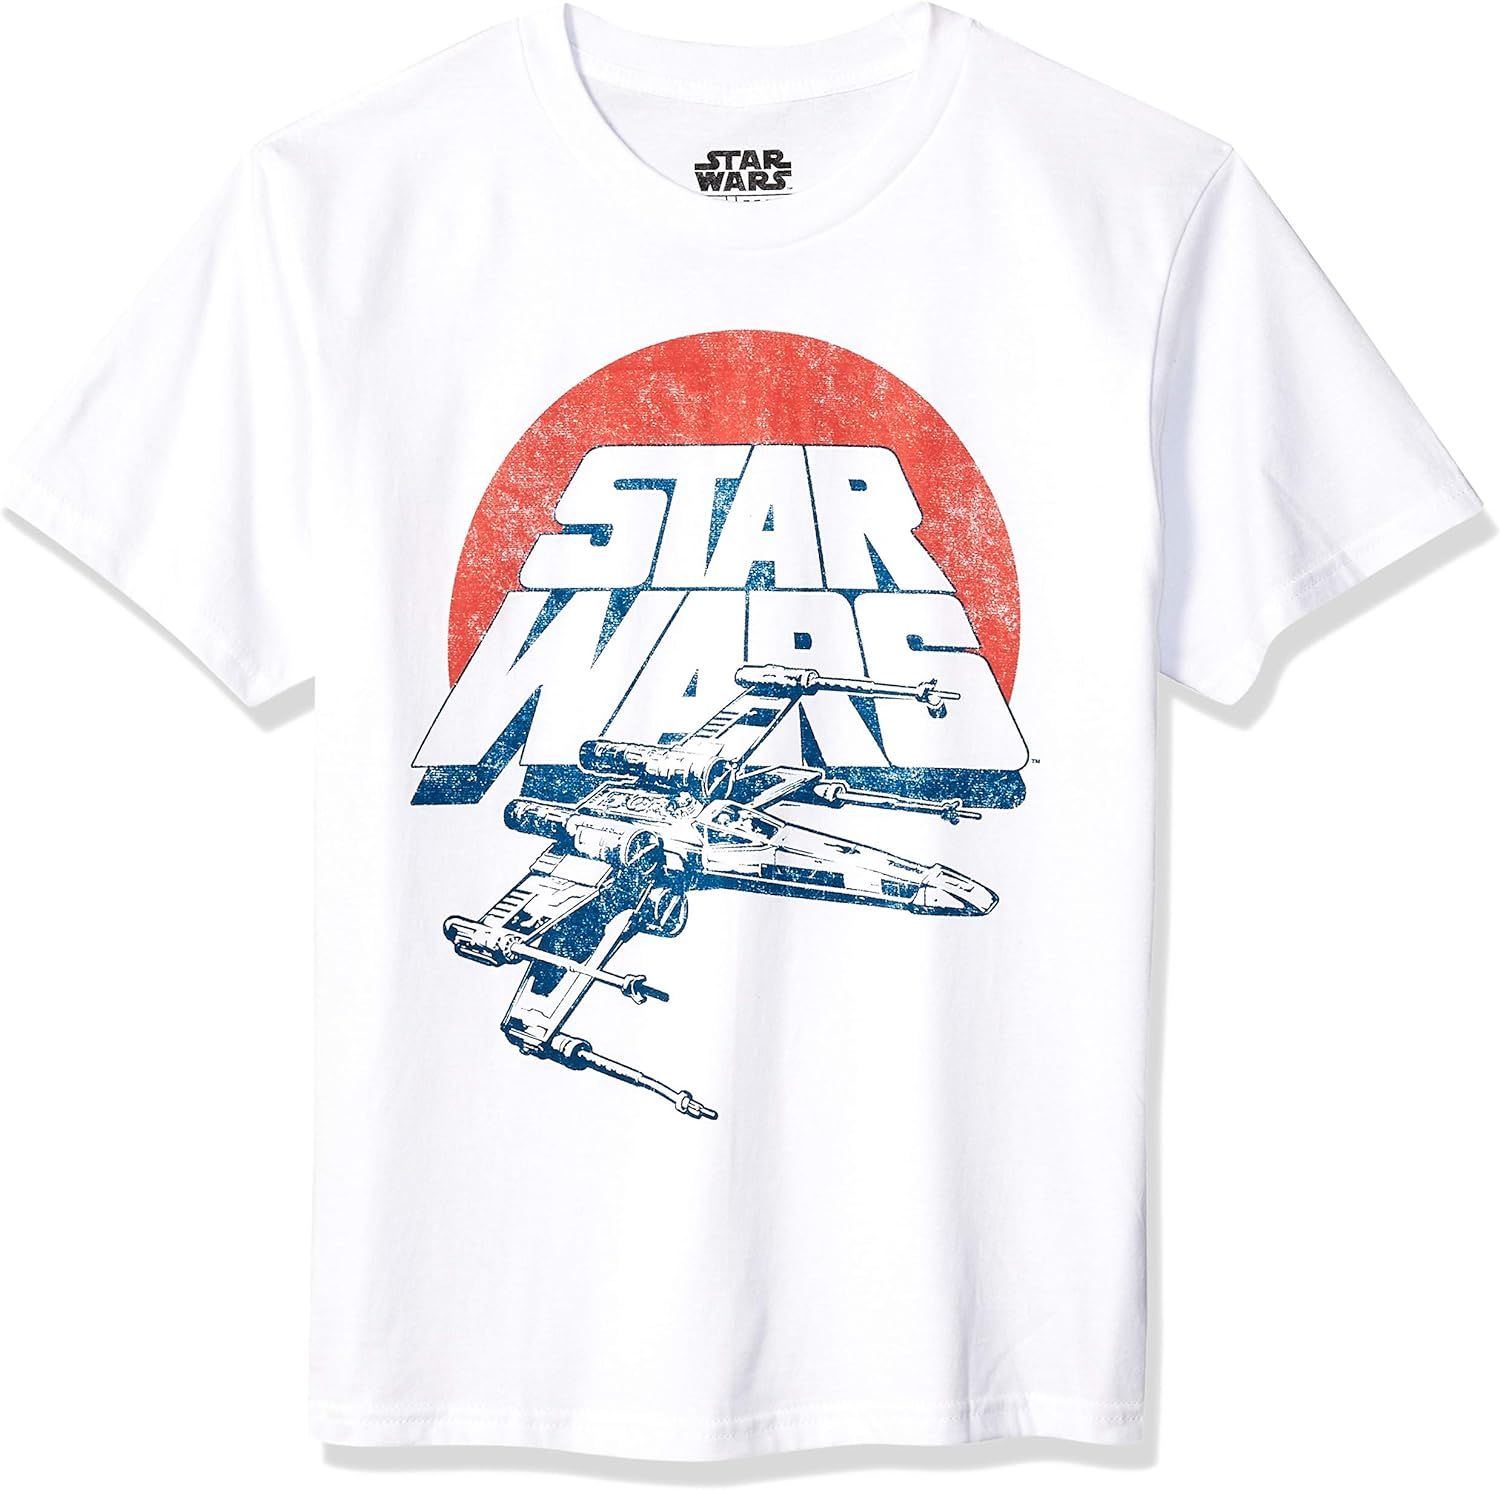 STAR WARS Boys' Vintage Inspired X-Wing Fighter T-Shirt | Amazon (US)